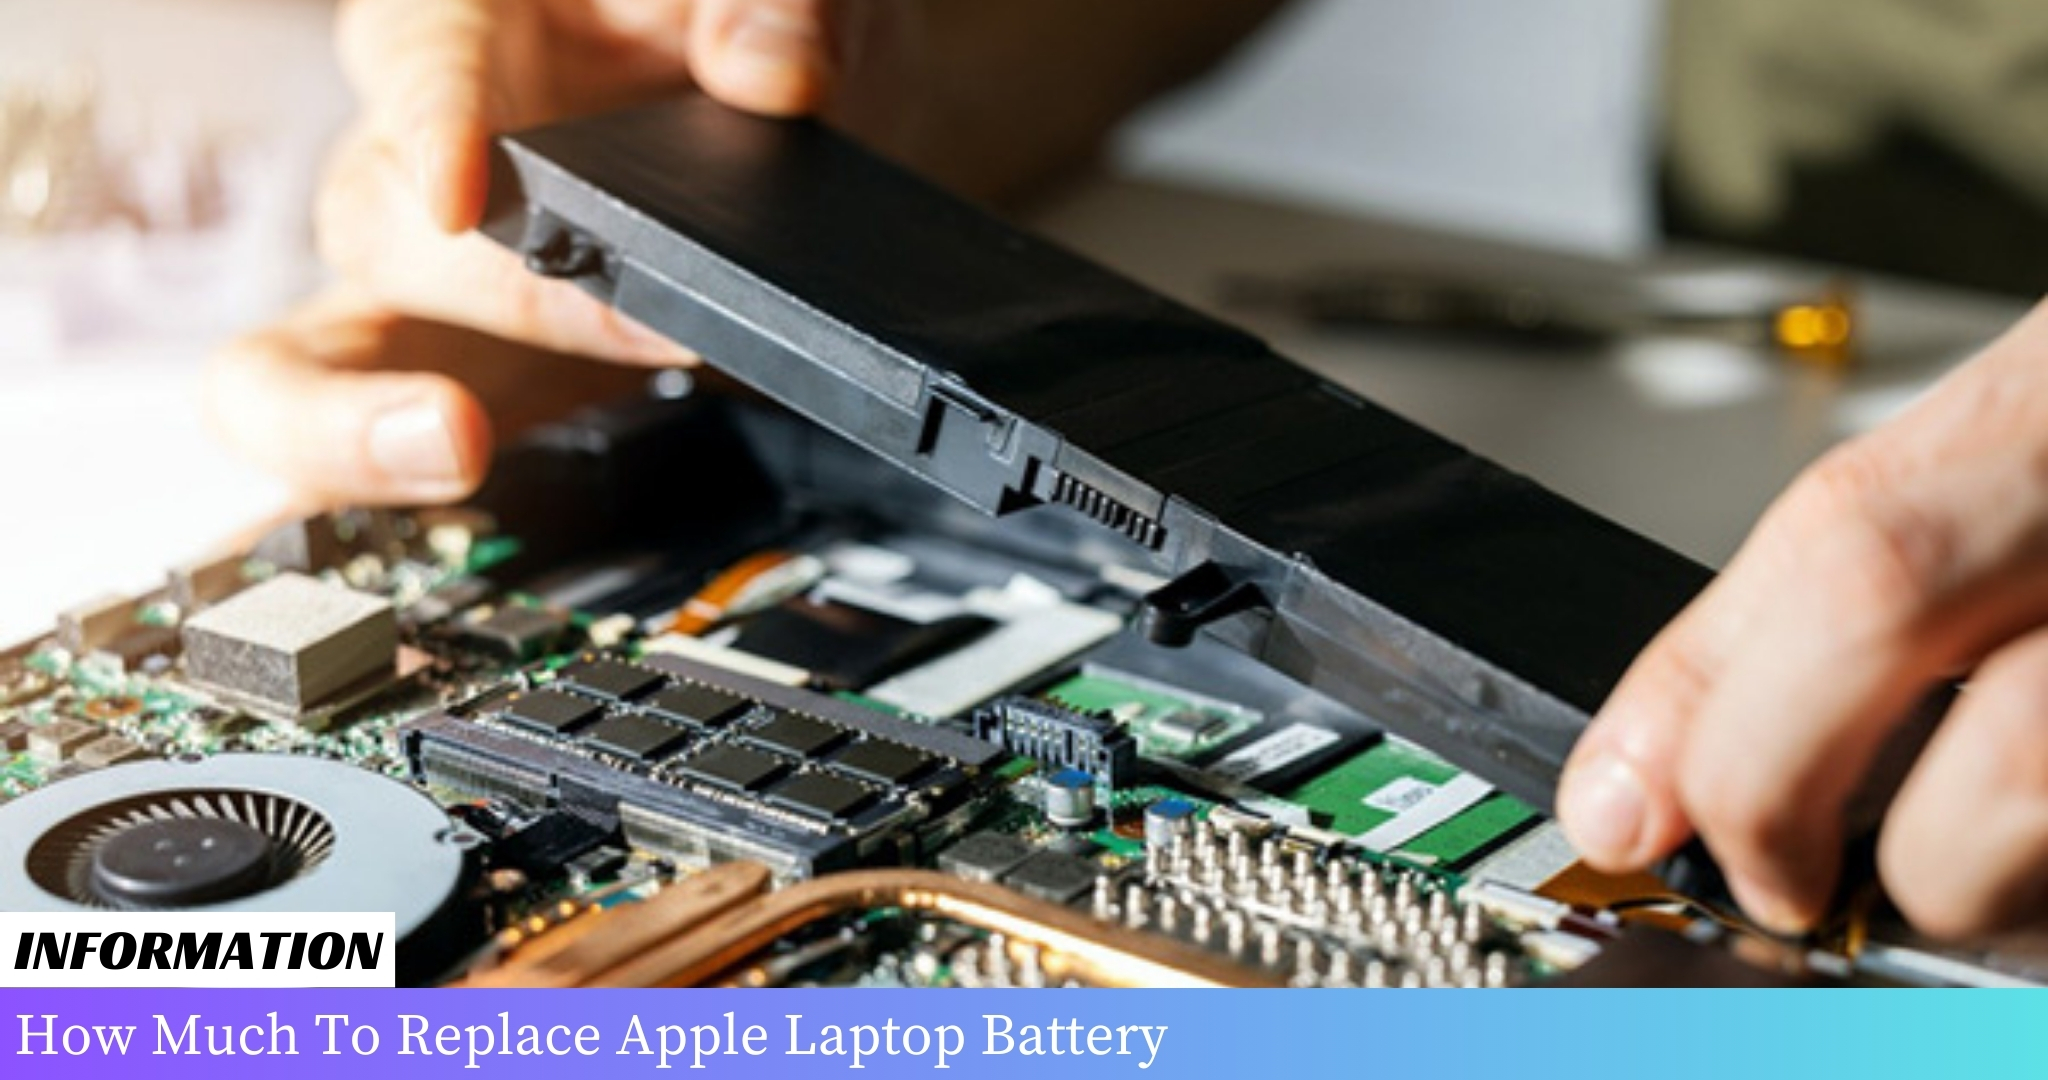 A step-by-step guide on replacing the battery of an Apple laptop. Detailed instructions for a smooth battery replacement process.